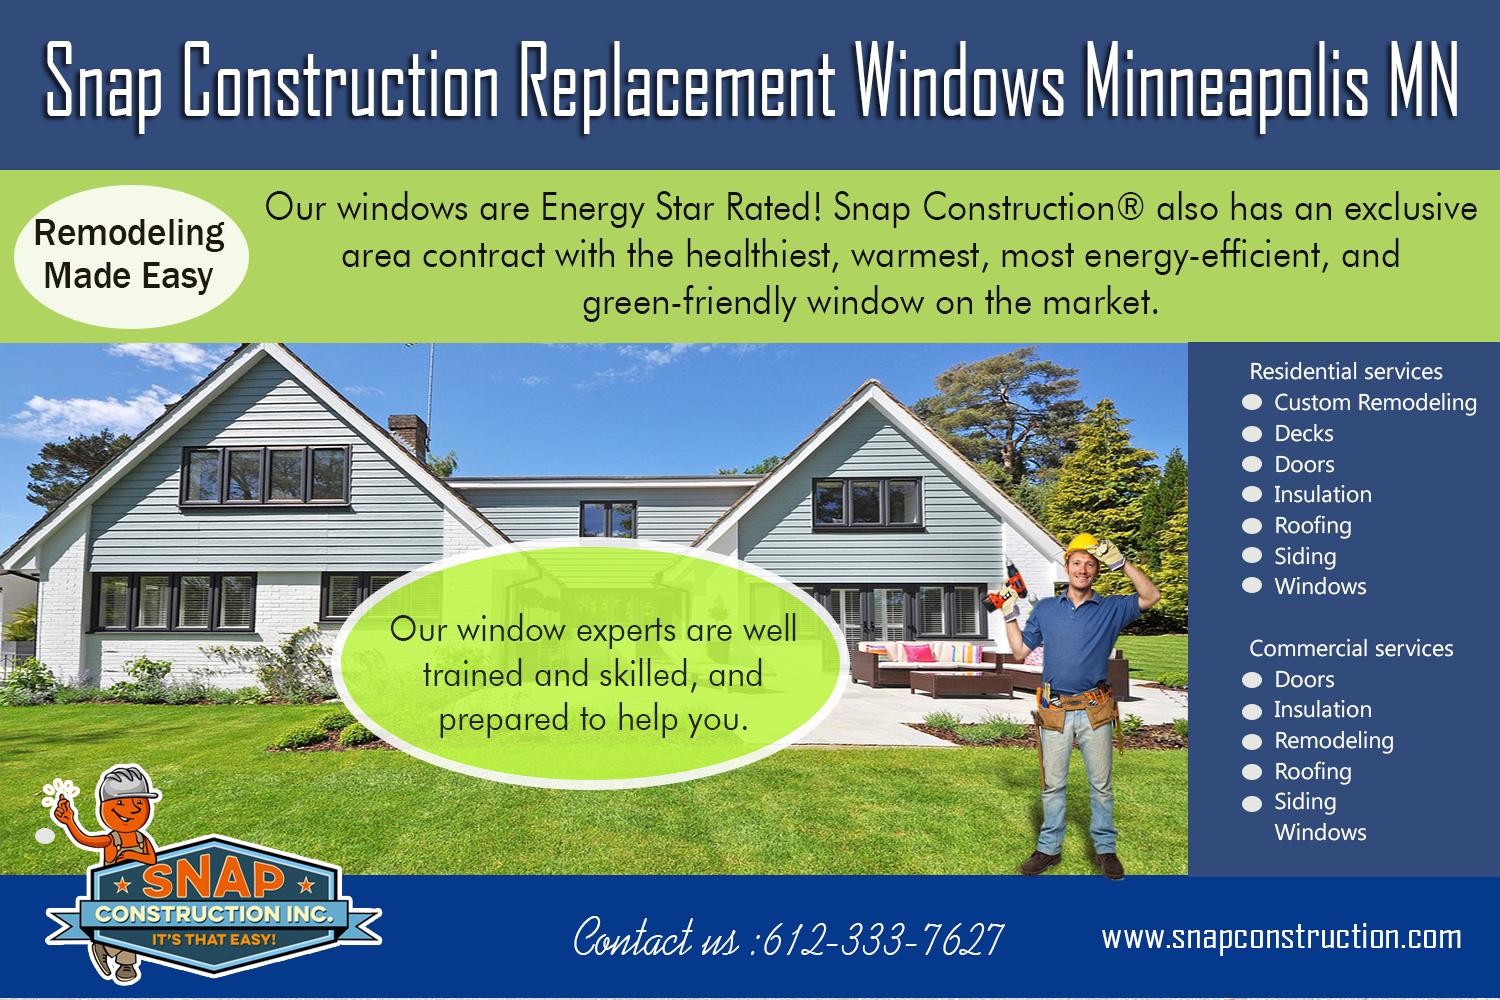 Snap Construction window glass replacement minneapolis